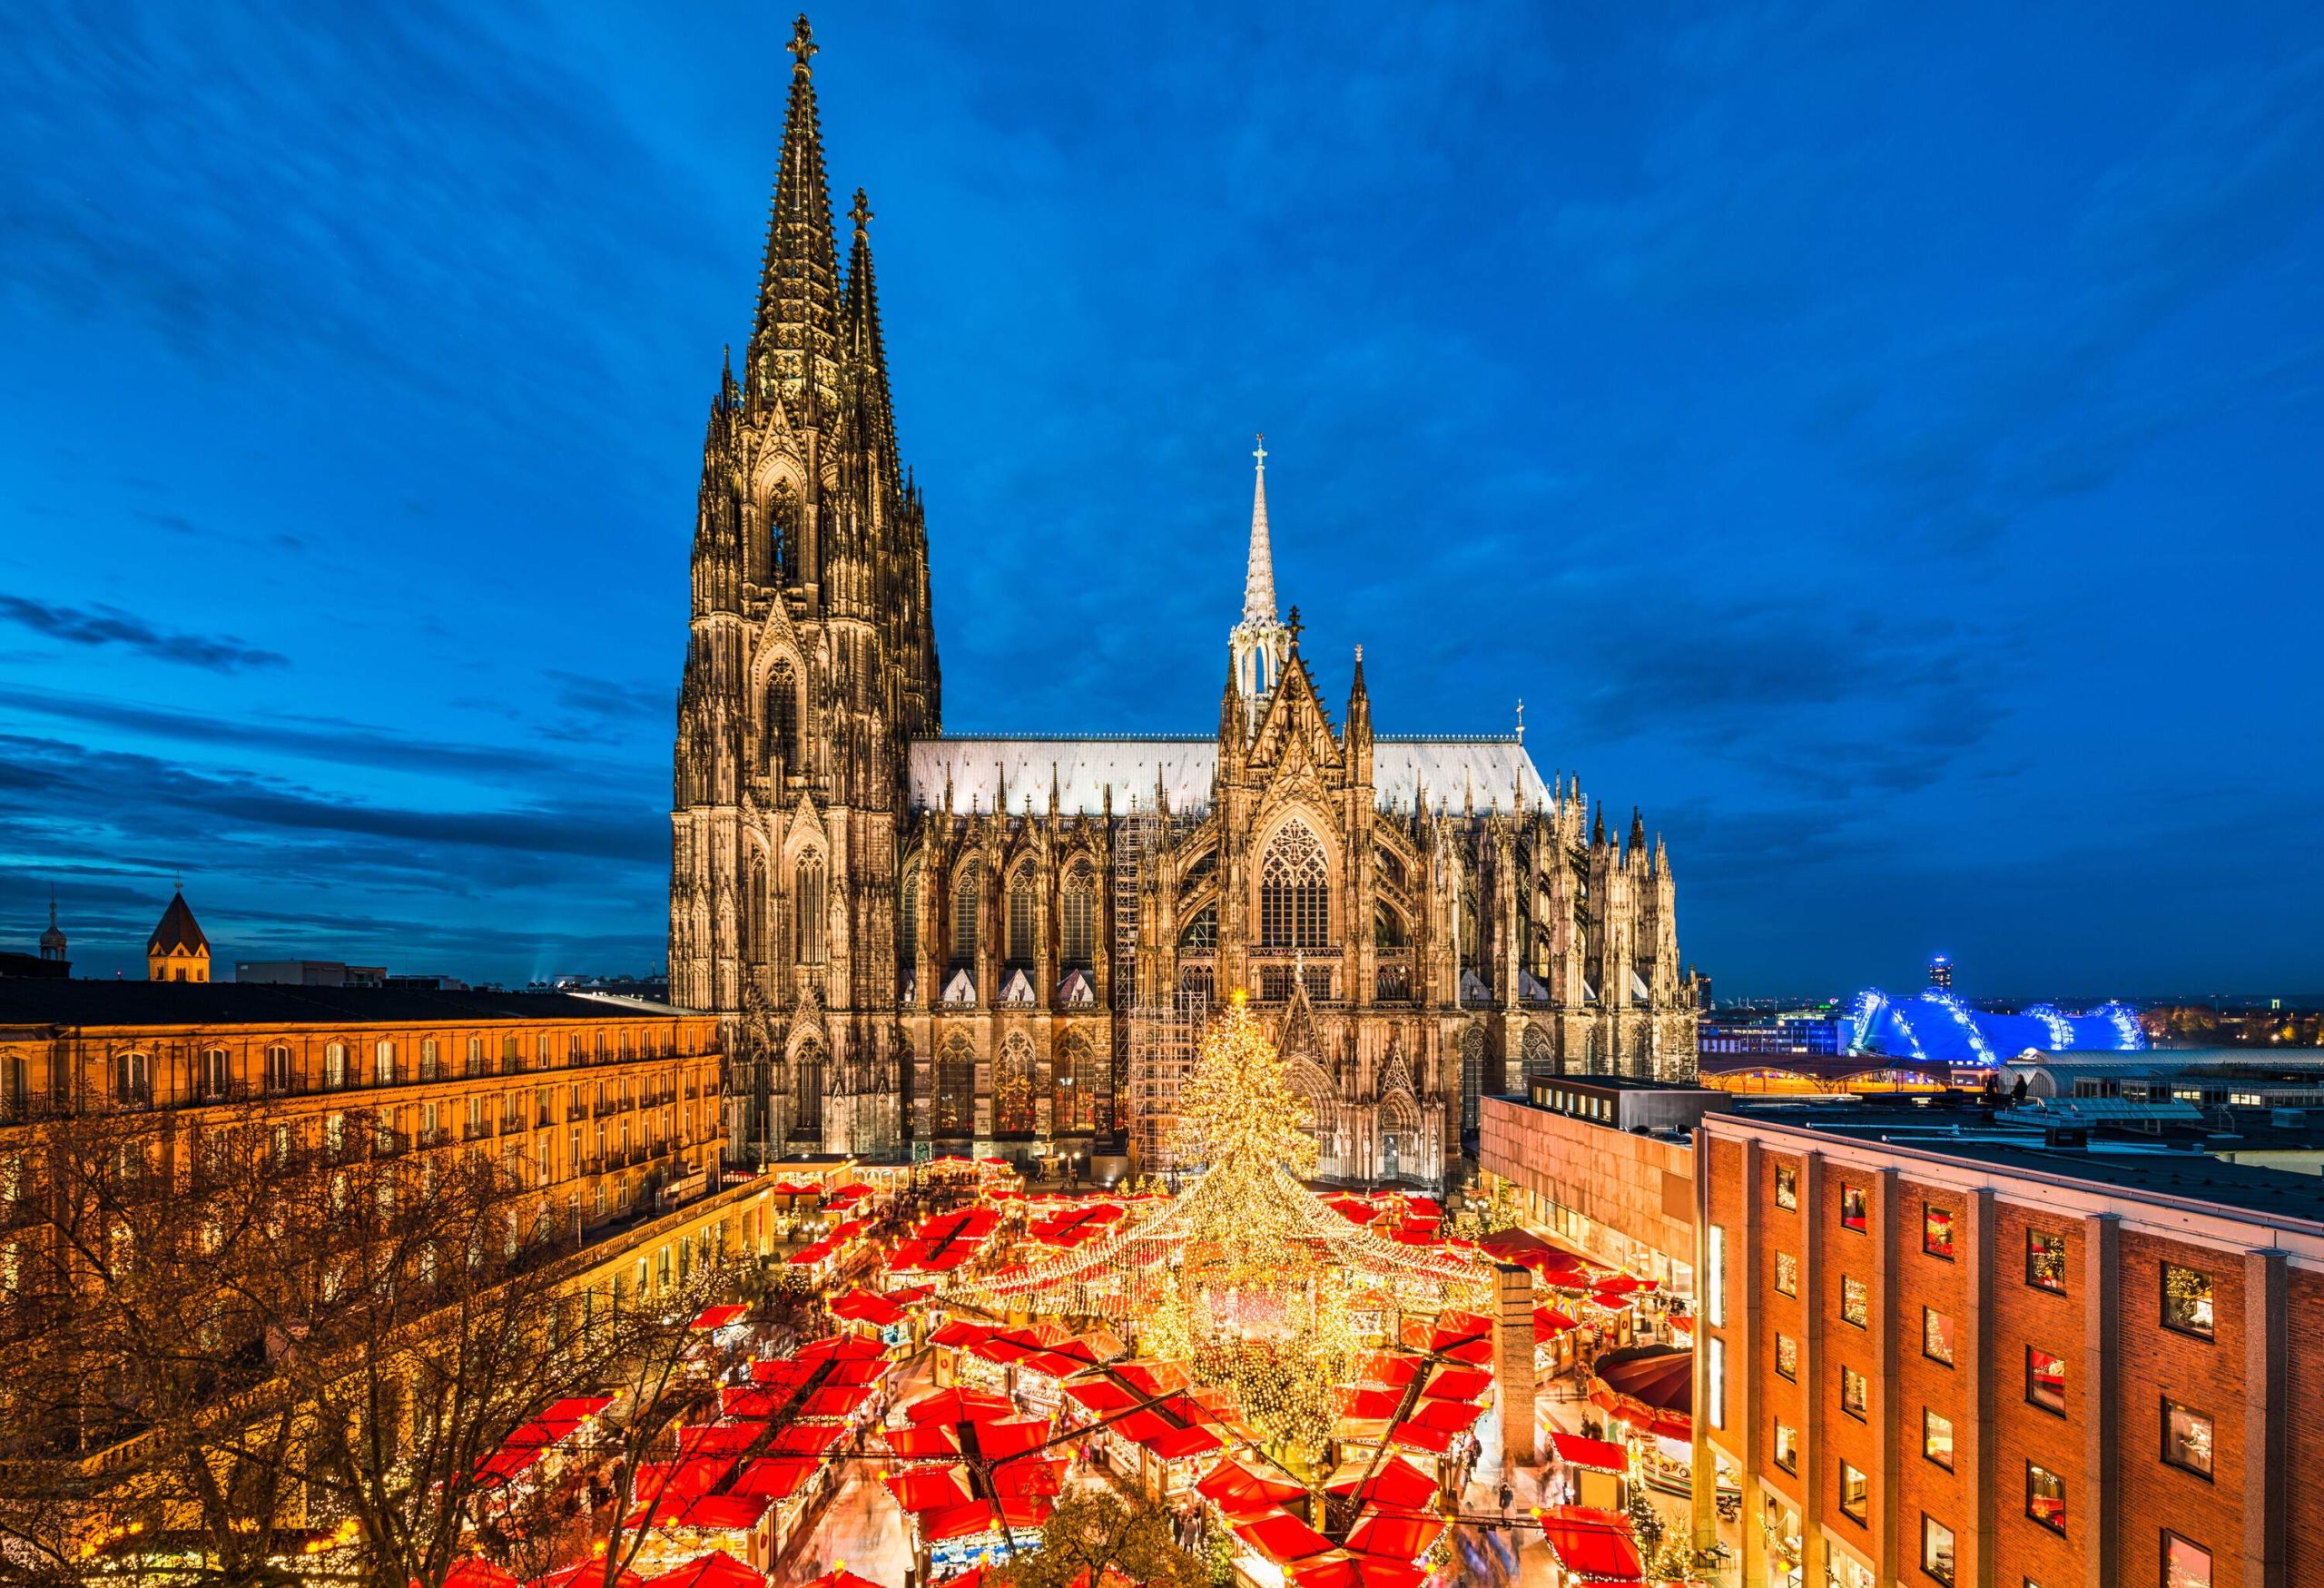 An imposing Gothic-styled cathedral with a brilliant Christmas market in the middle of its square.